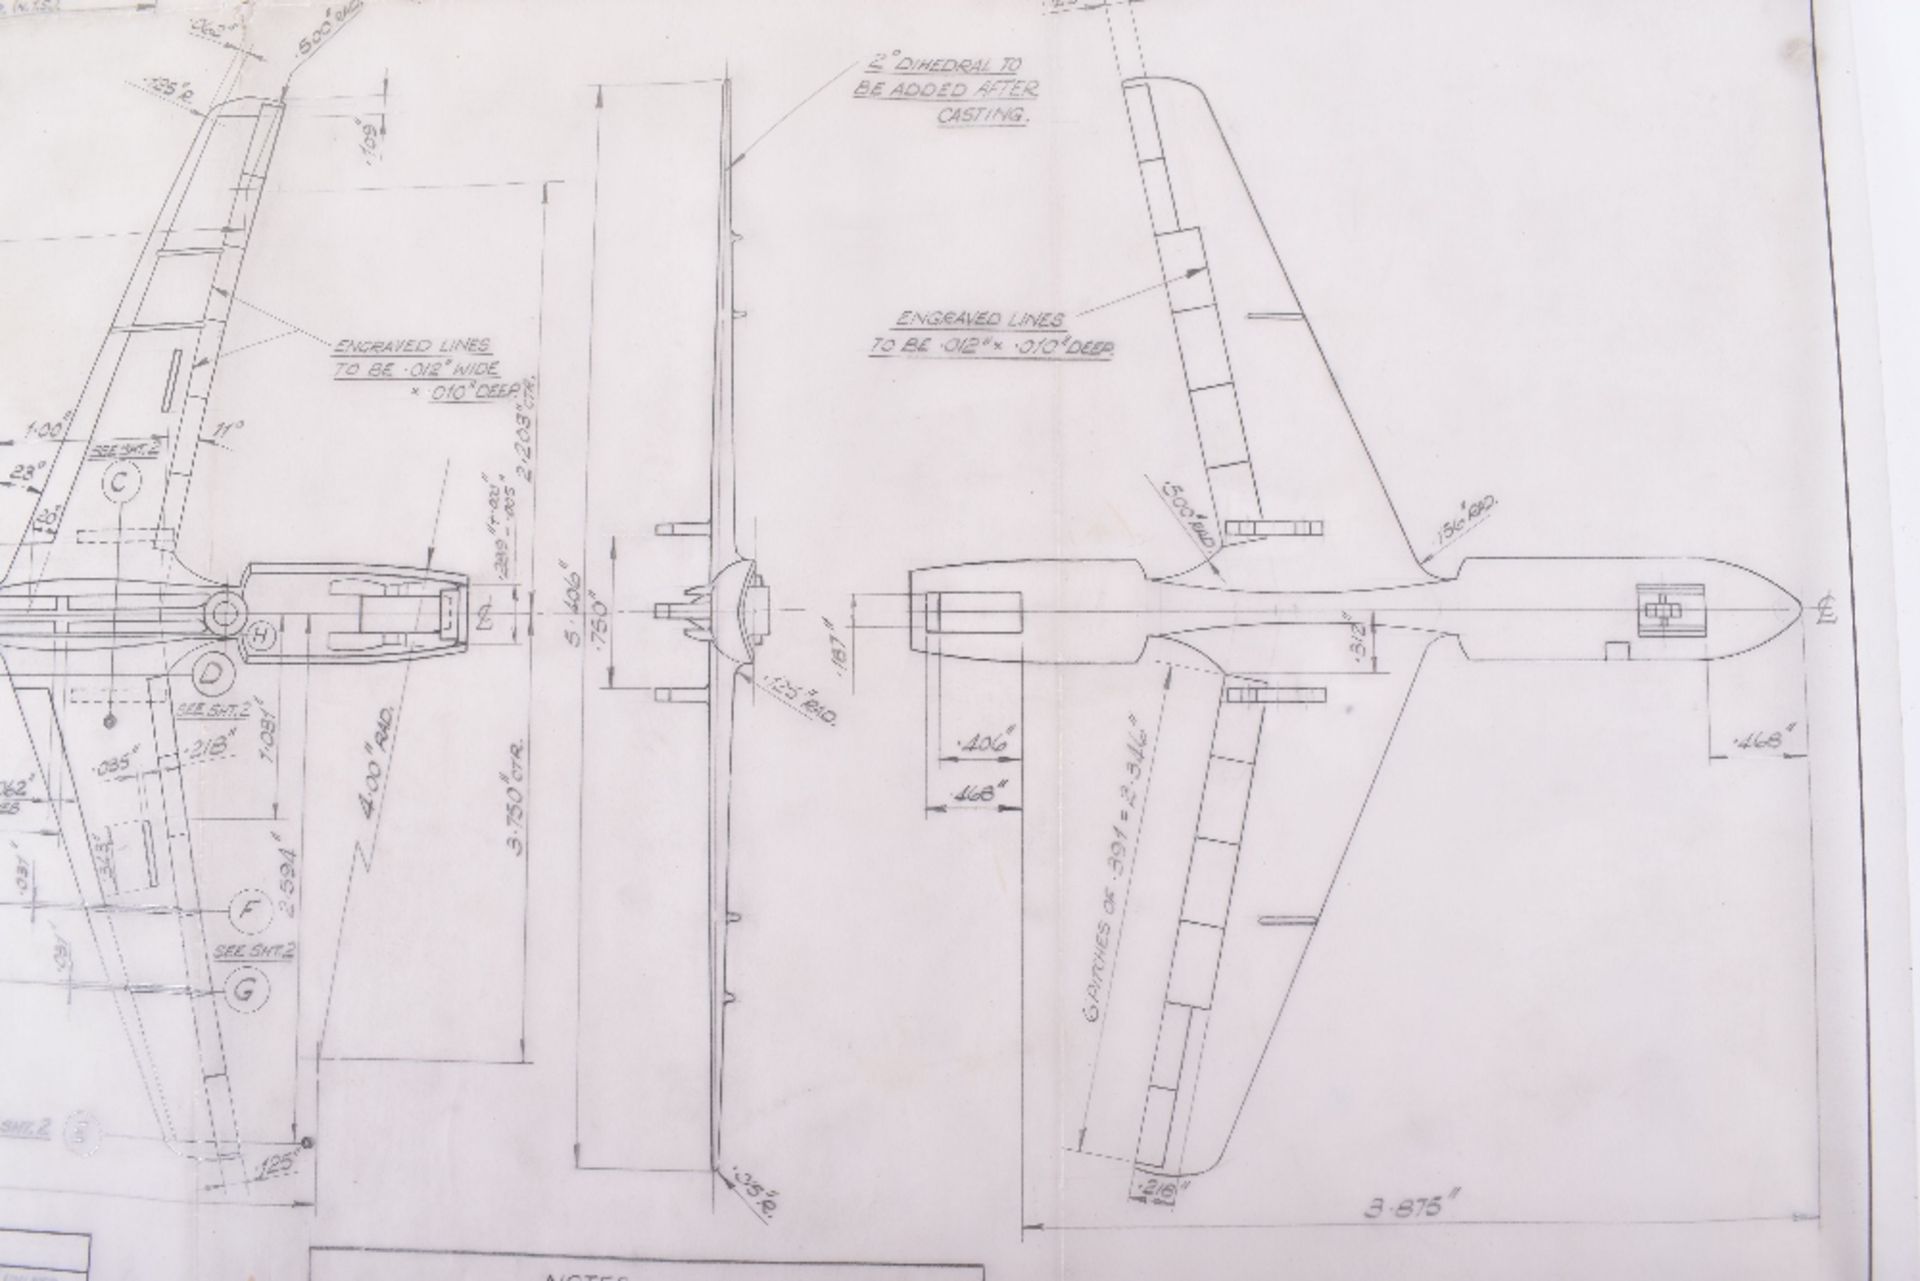 Original Die casting machine tools (DCMT) Lone Star Drawing - Image 4 of 7